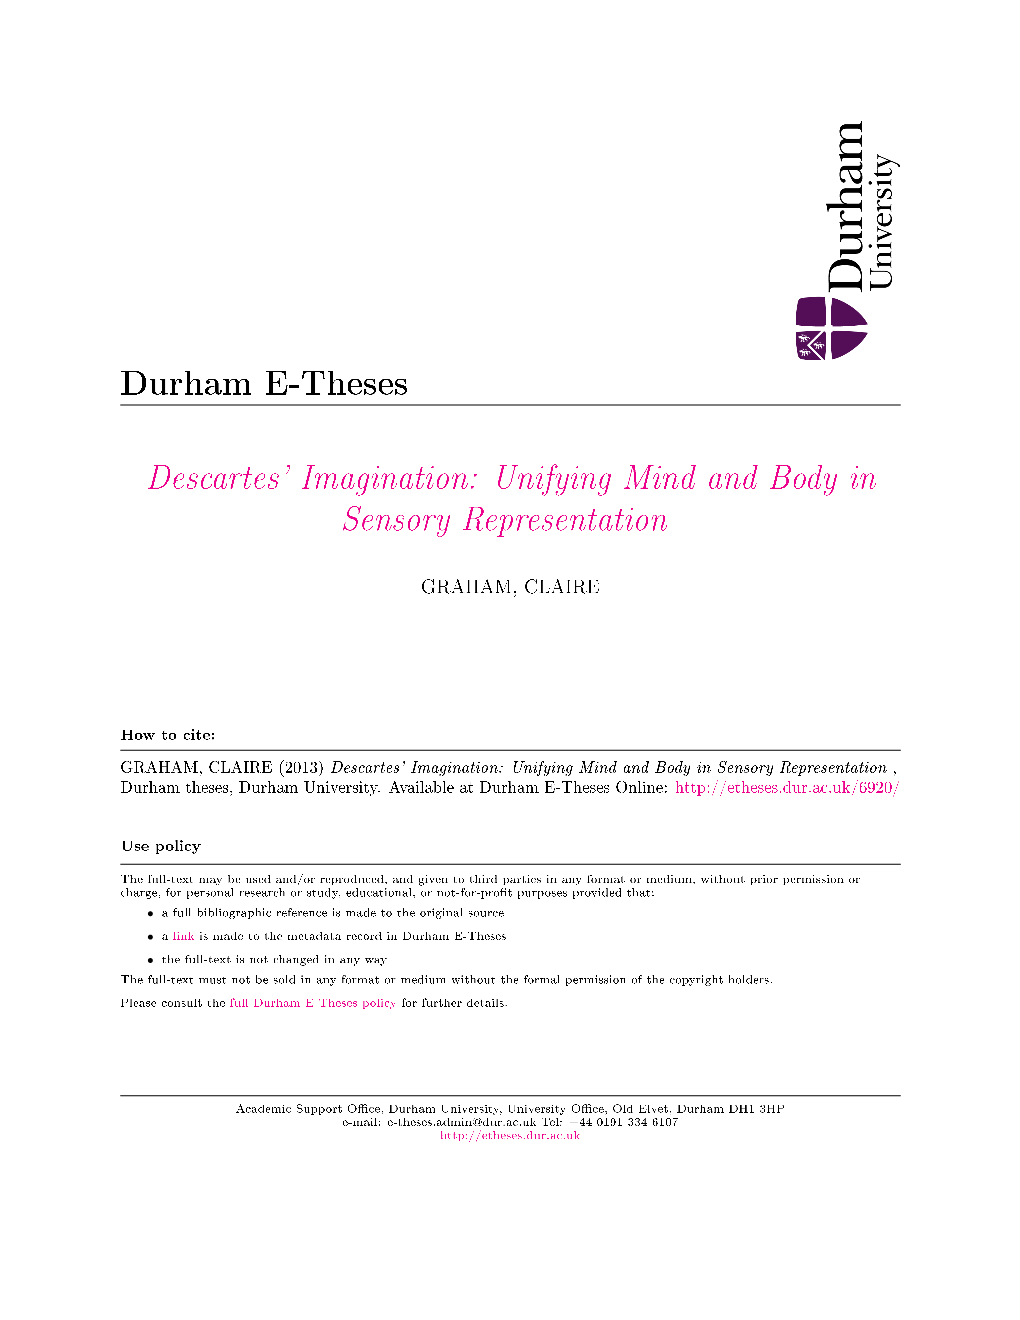 Descartes' Imagination: Unifying Mind and Body in Sensory Representation